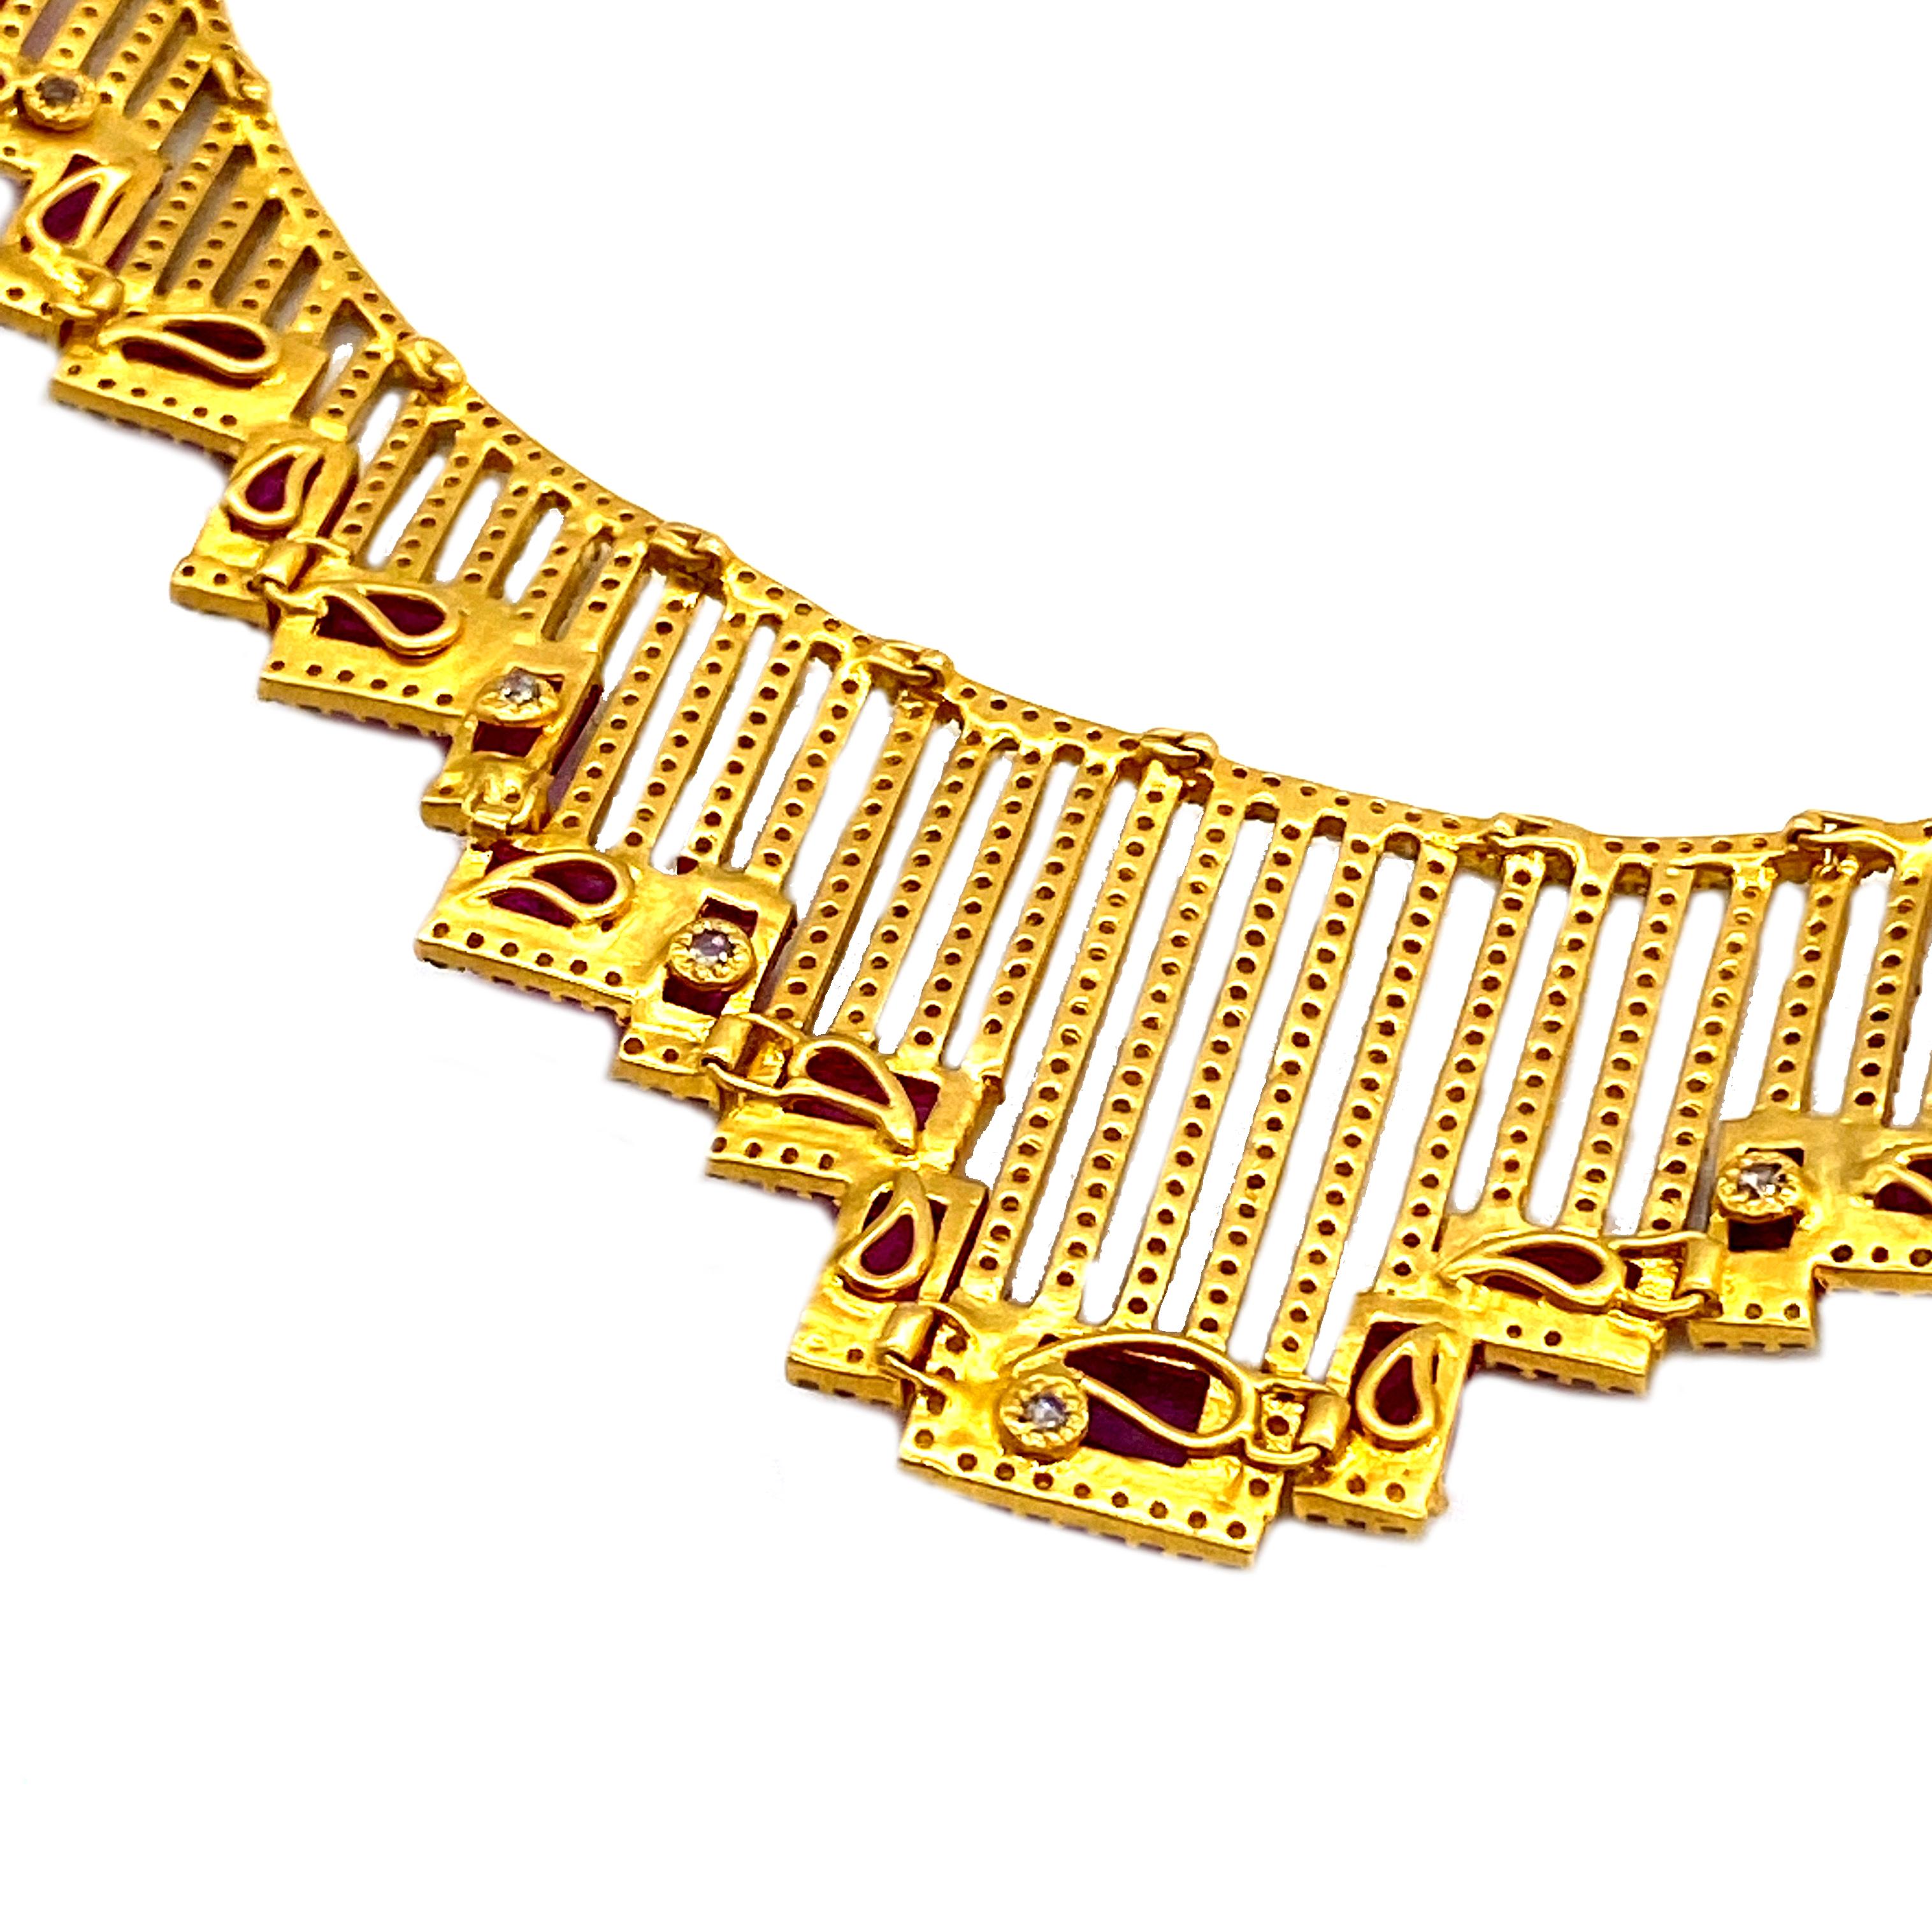 Spectacular Coomi necklace crafted in 20K yellow gold showcasing Ruby weighing approximately 21.44cts and brilliant-cut diamonds weighing approximately 5.55cts, inspired by Art Deco and Mosaic art from the Luminosity Collection of Coomi, which